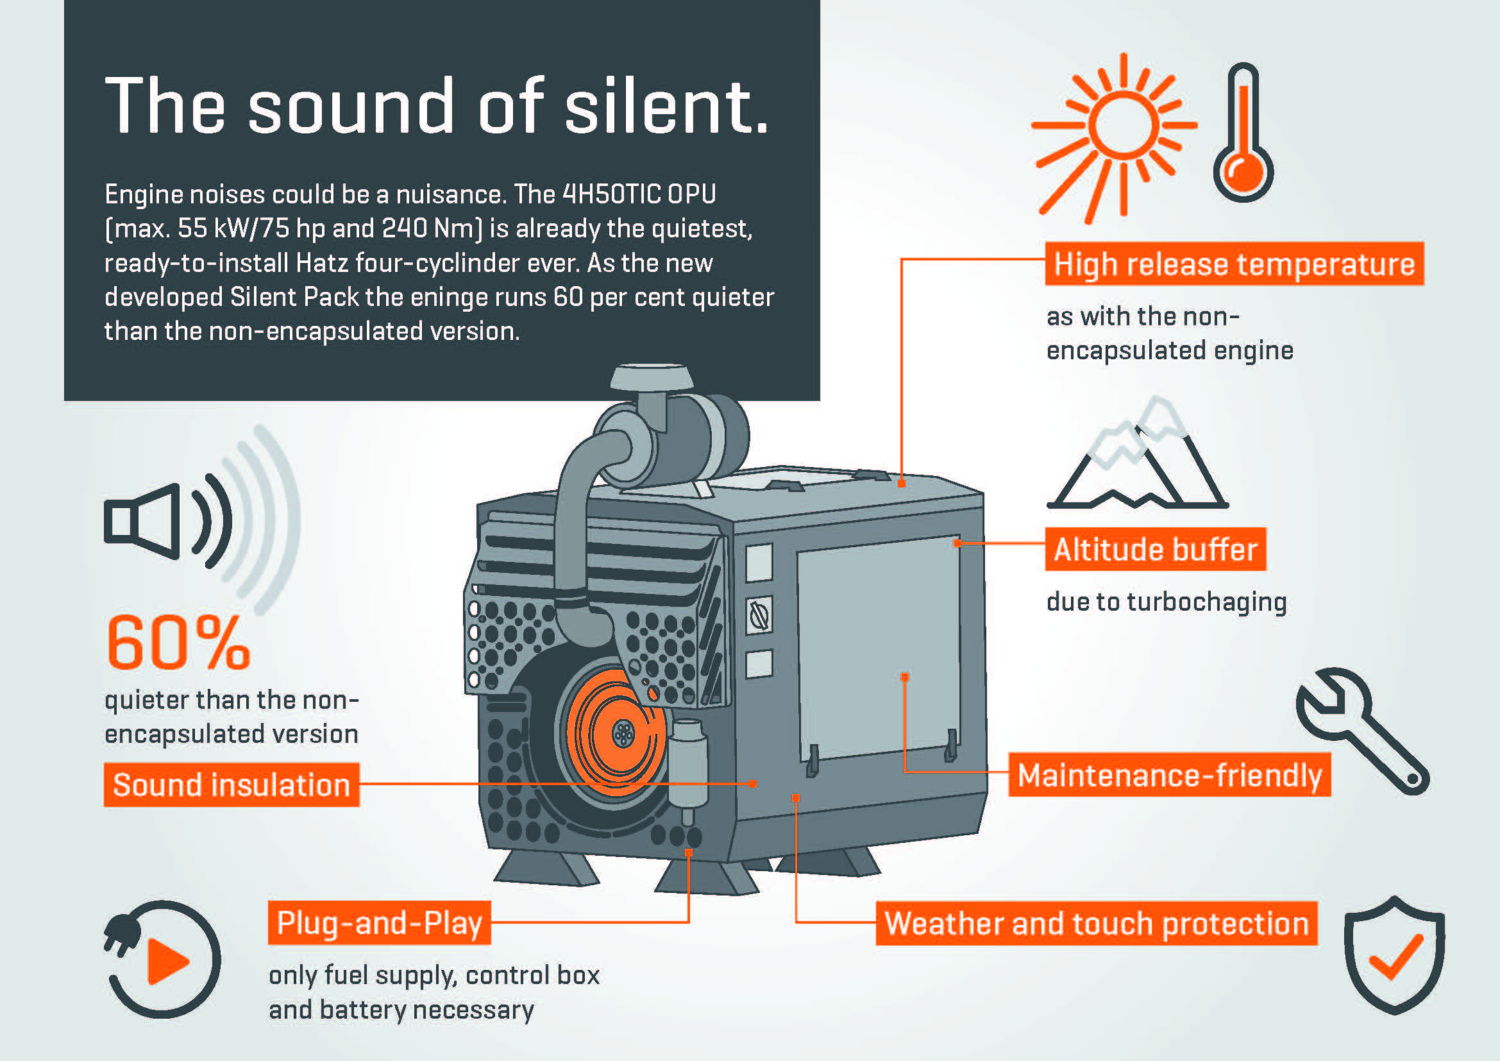 The most important features of the industrial diesel engine Hatz 4H50TIC Silent Pack at a glance